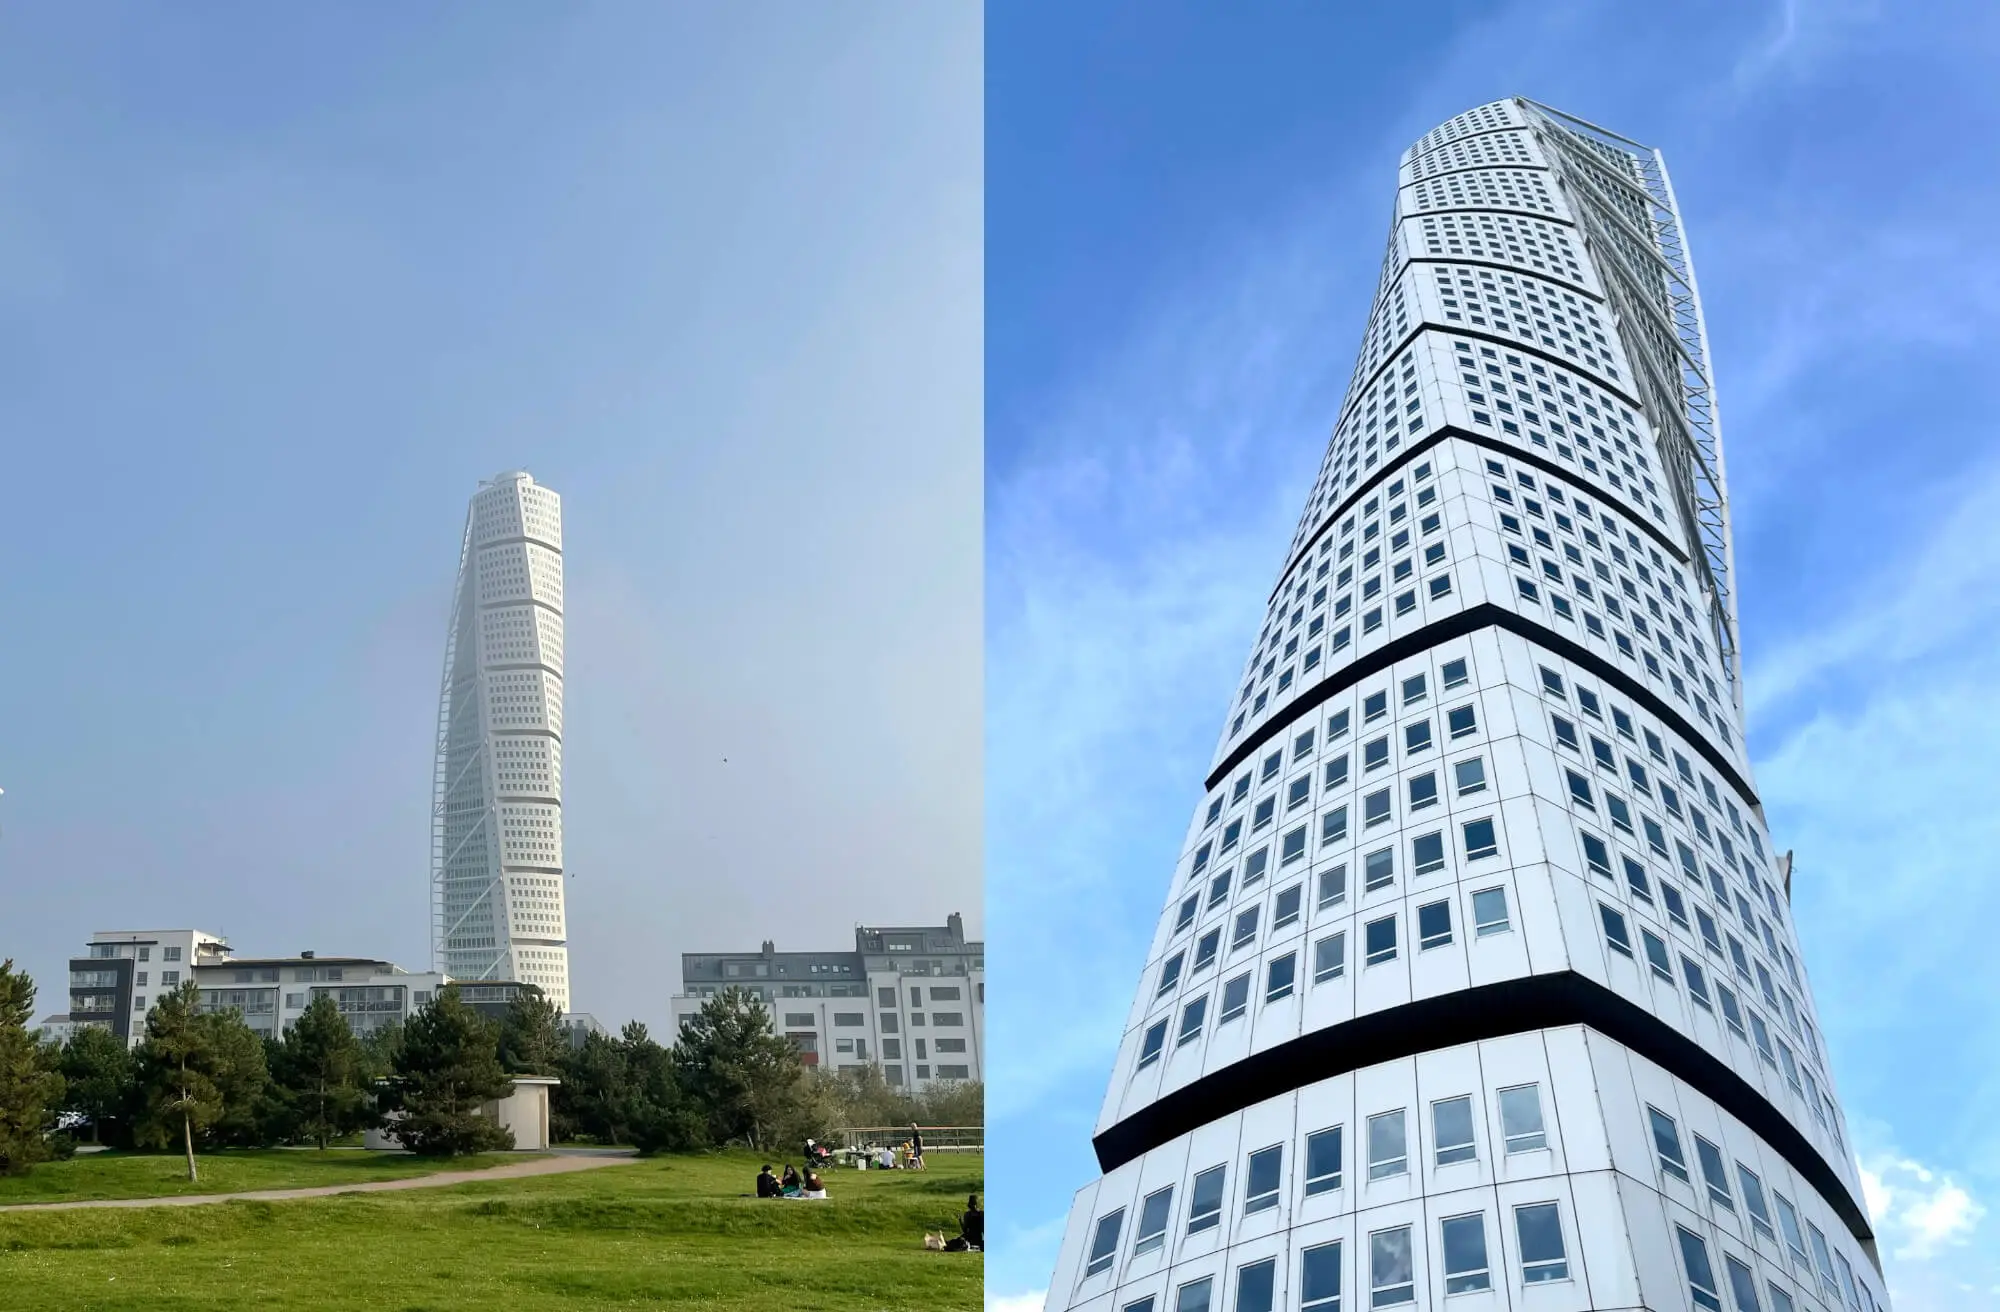 Impressive tower in Malmo, the Turning Torso, seen from afar and below.